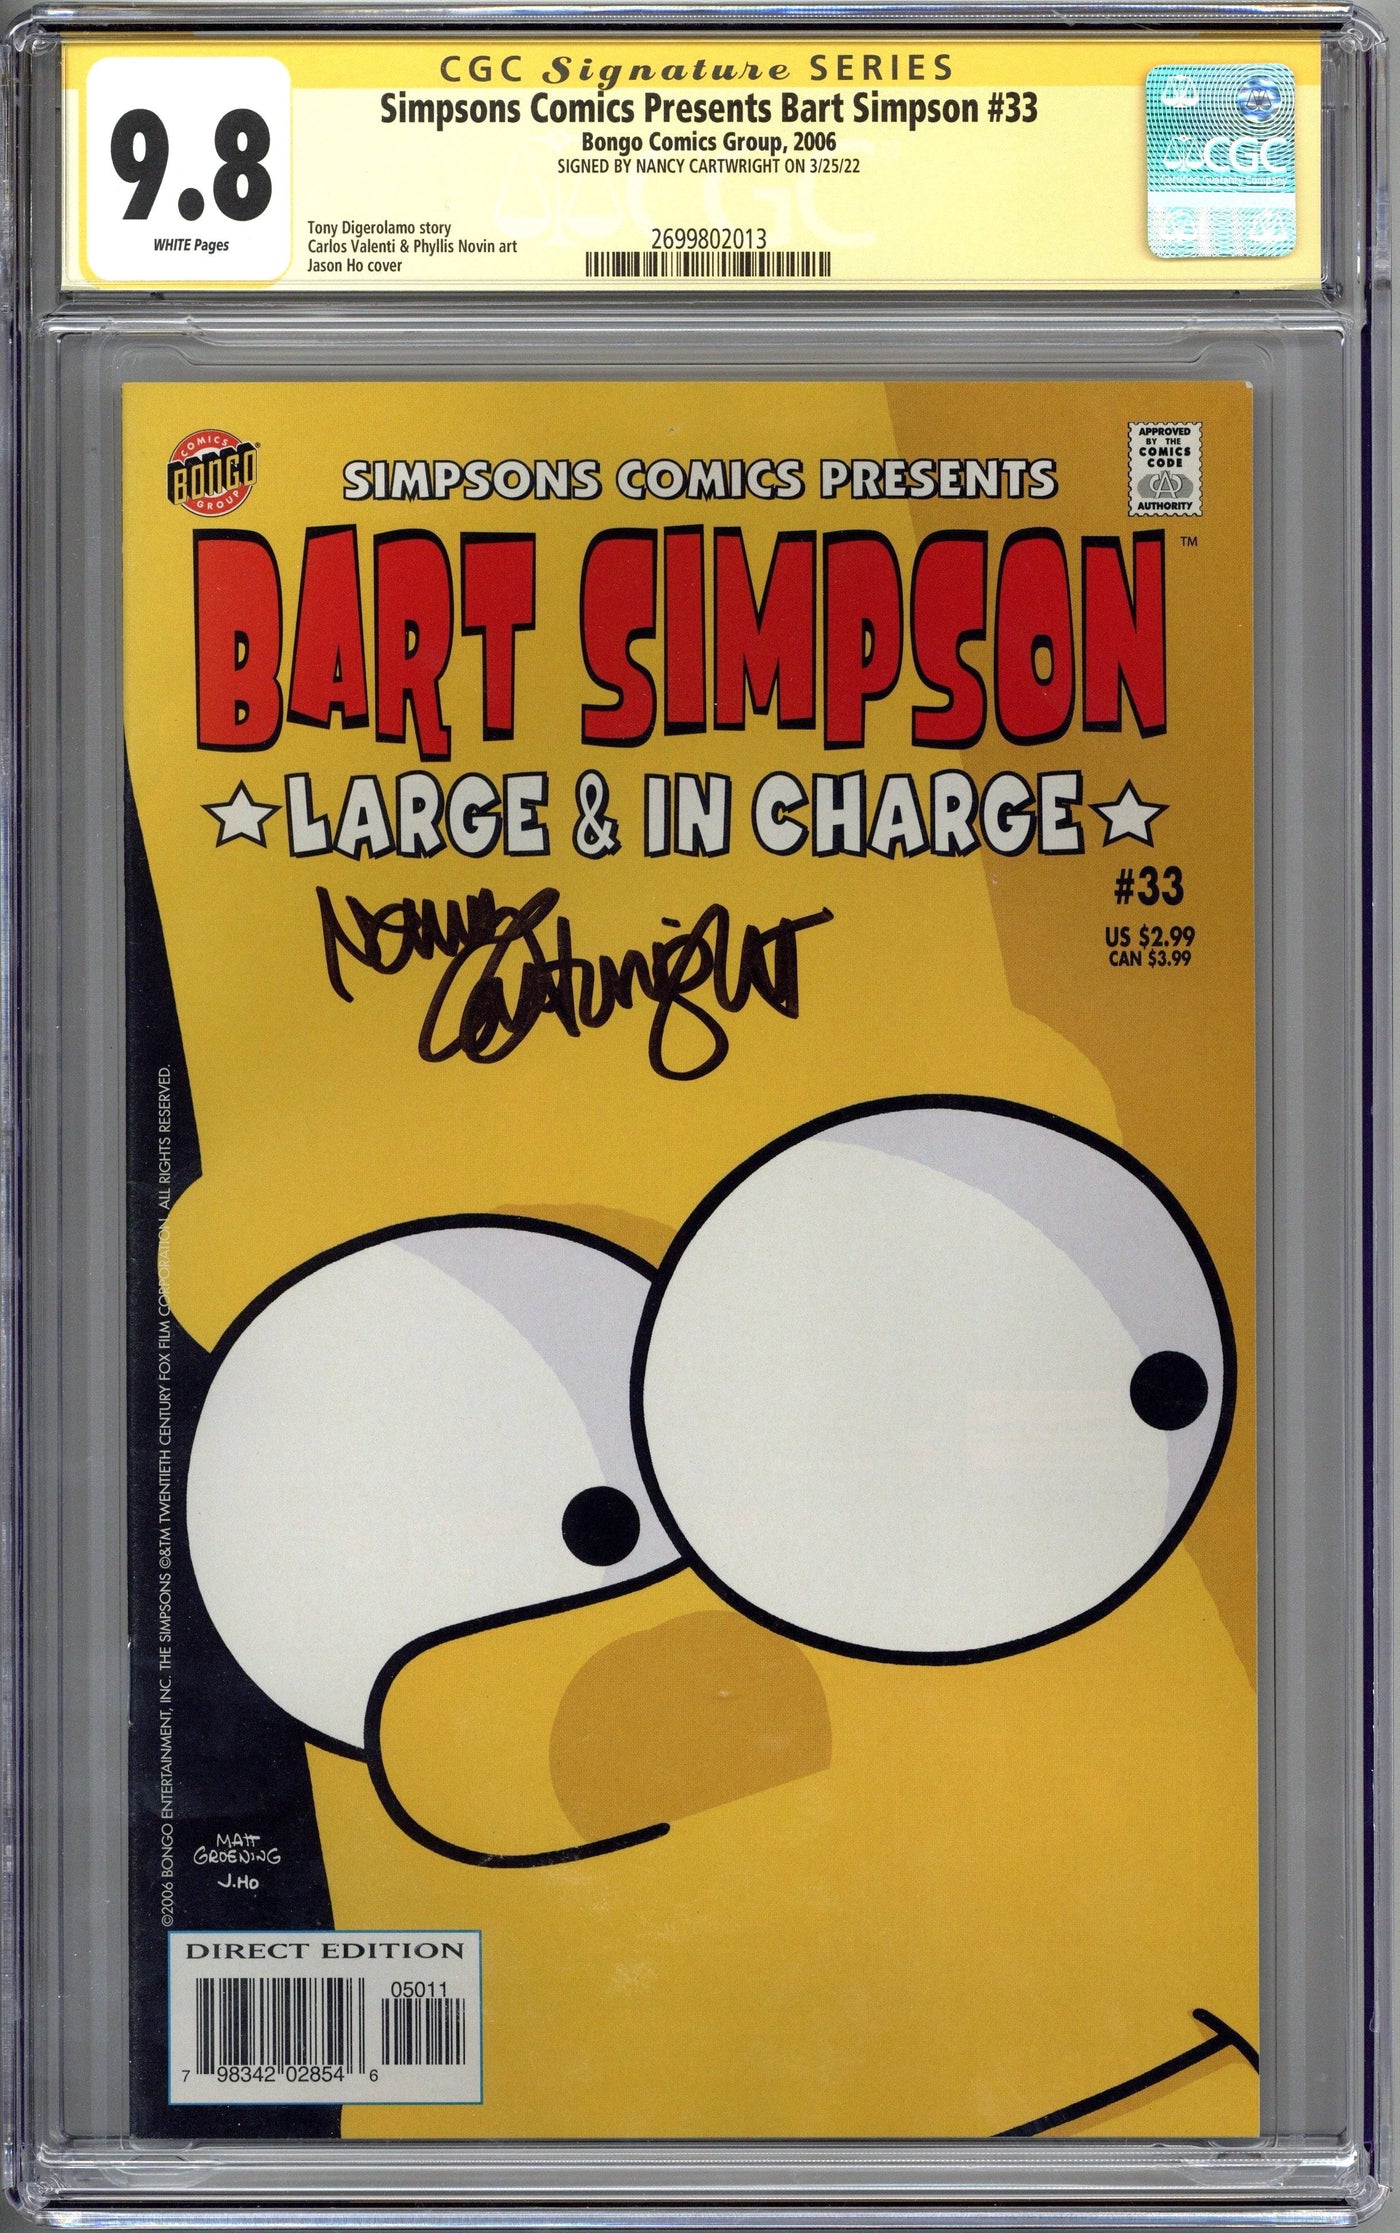 NANCY CARTWRIGHT SIGNED BART SIMPSON COMIC BOOK CGC 9.8 AUTOGRAPHED NC10